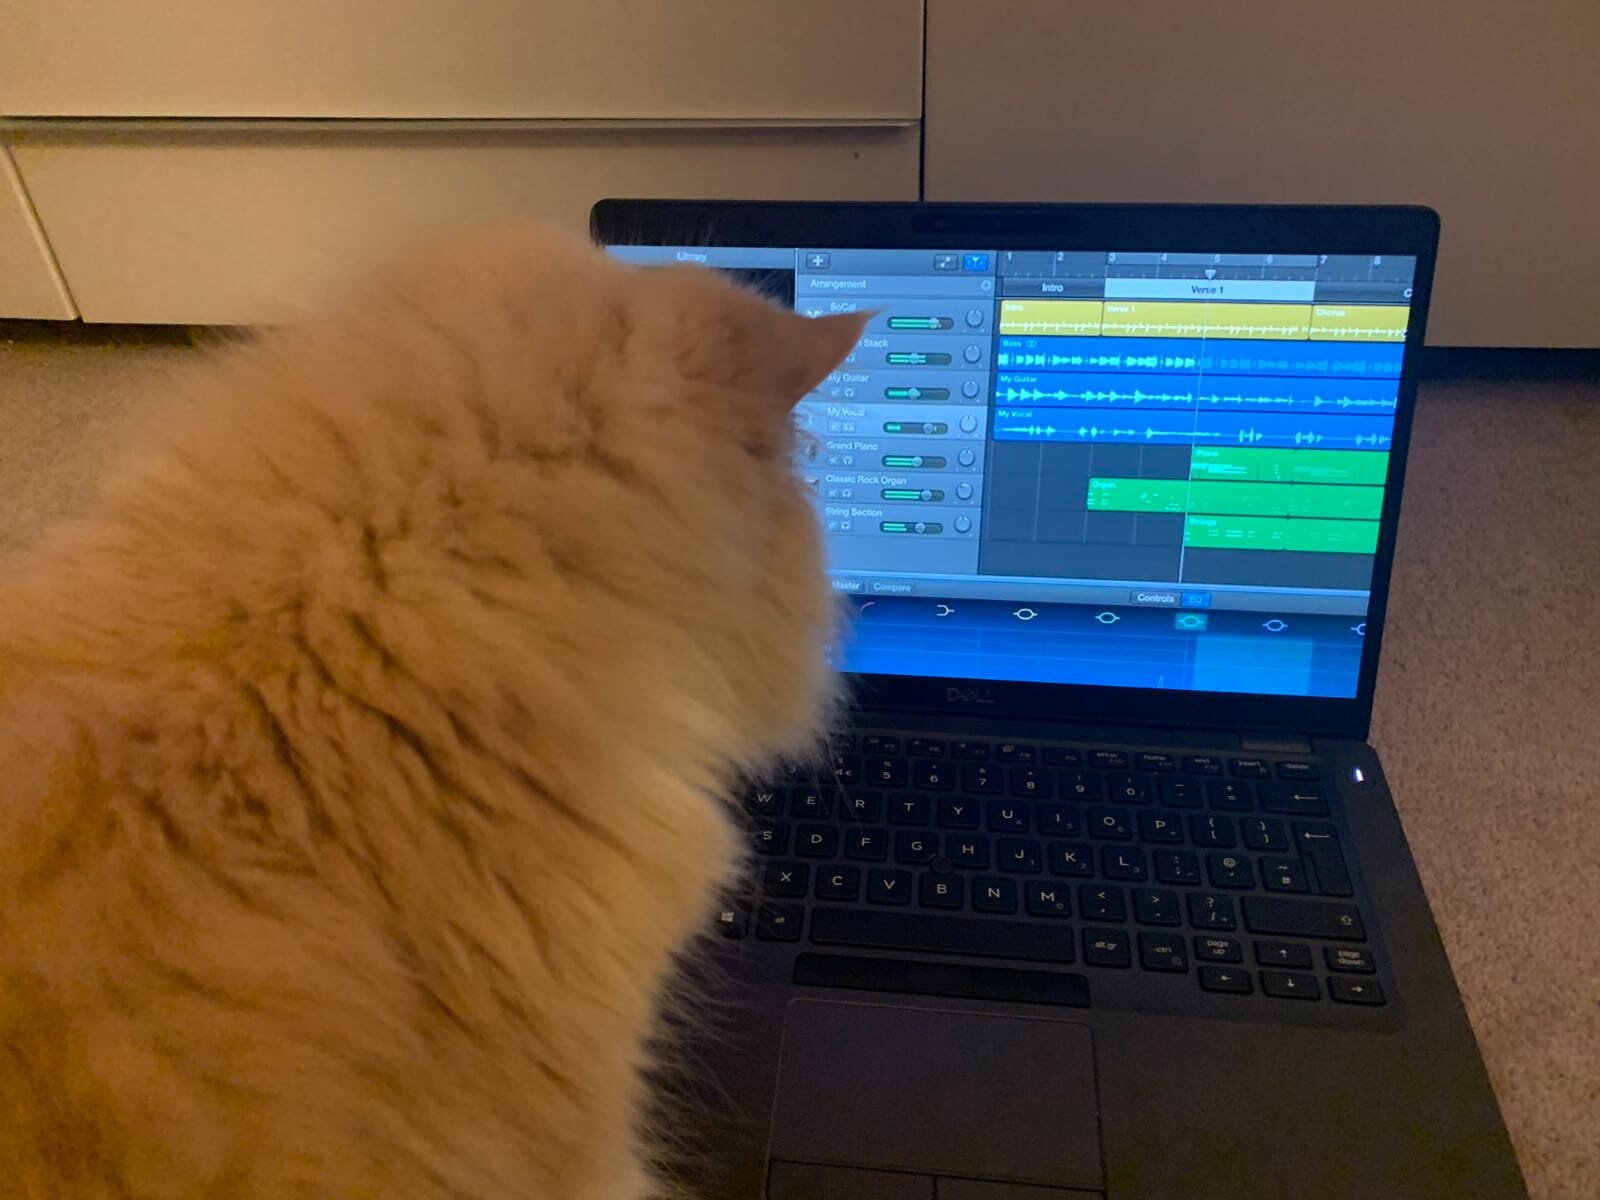 Monty mixing a new track